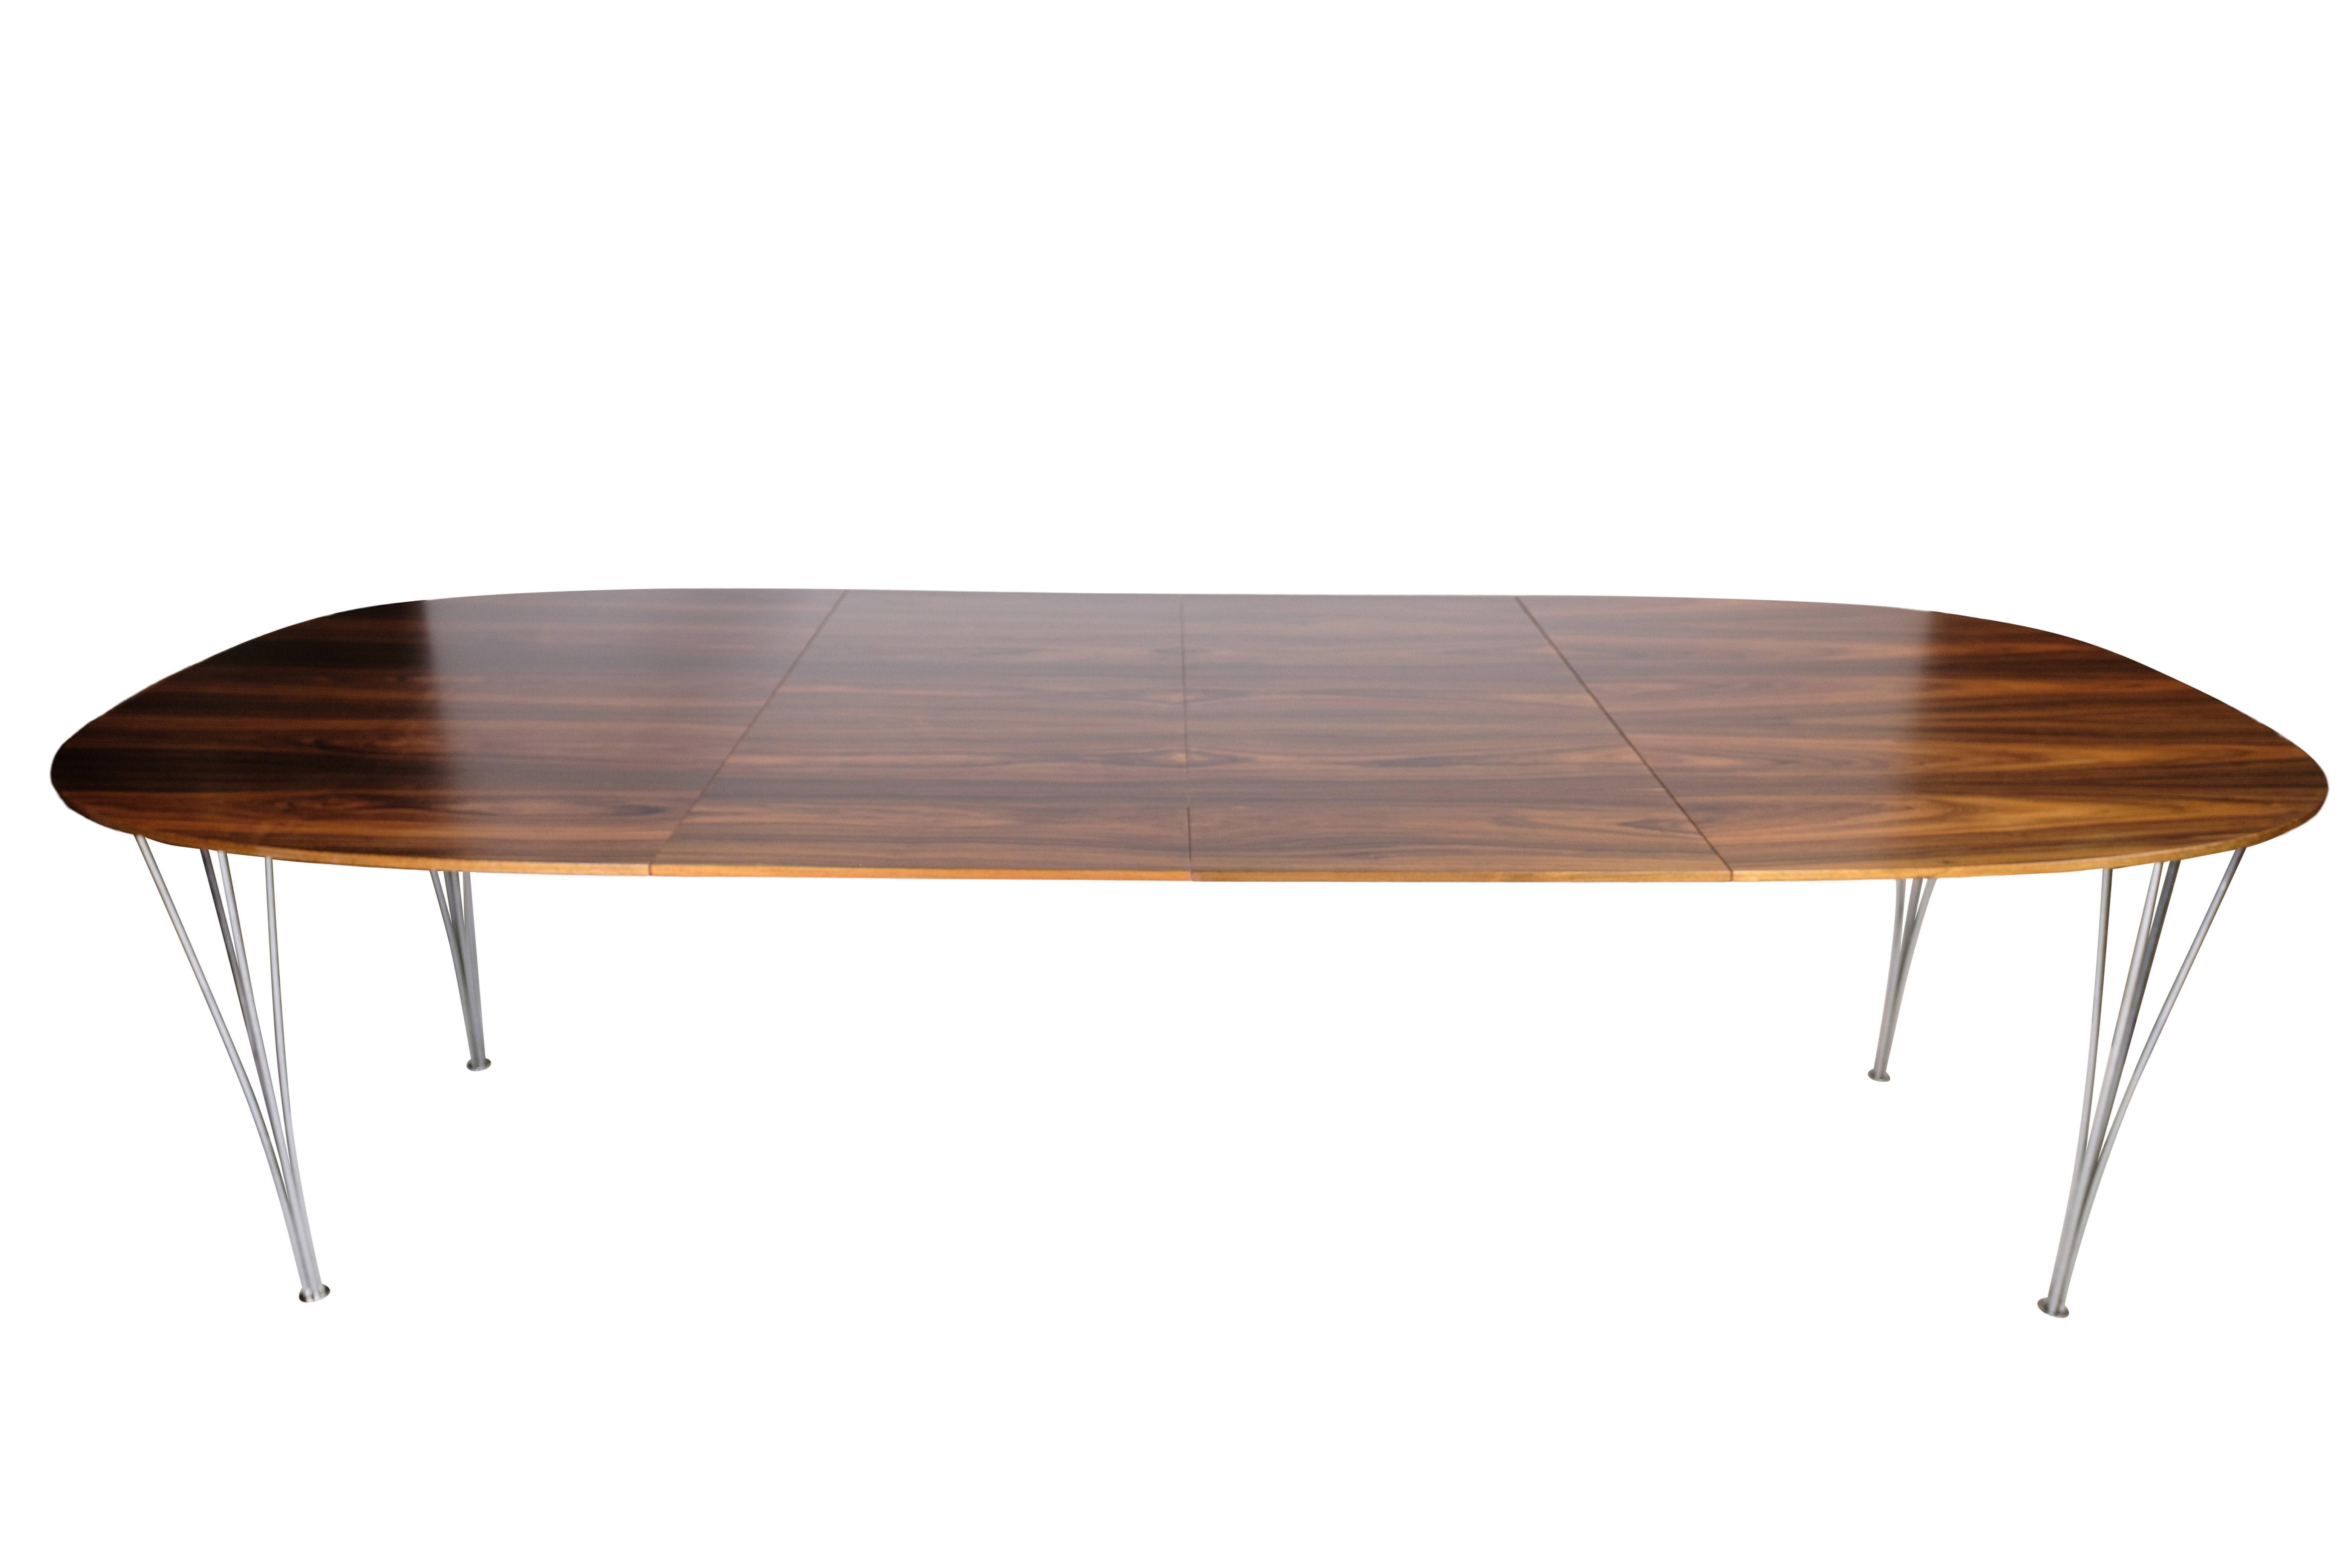 Dining table, designed by Piet Hein & Bruno Mathsson with rosewood veneer and steel legs produced by Fritz Hansen. The table is from the 1960s and is in incredibly nice condition.

This product will be inspected thoroughly at our professional